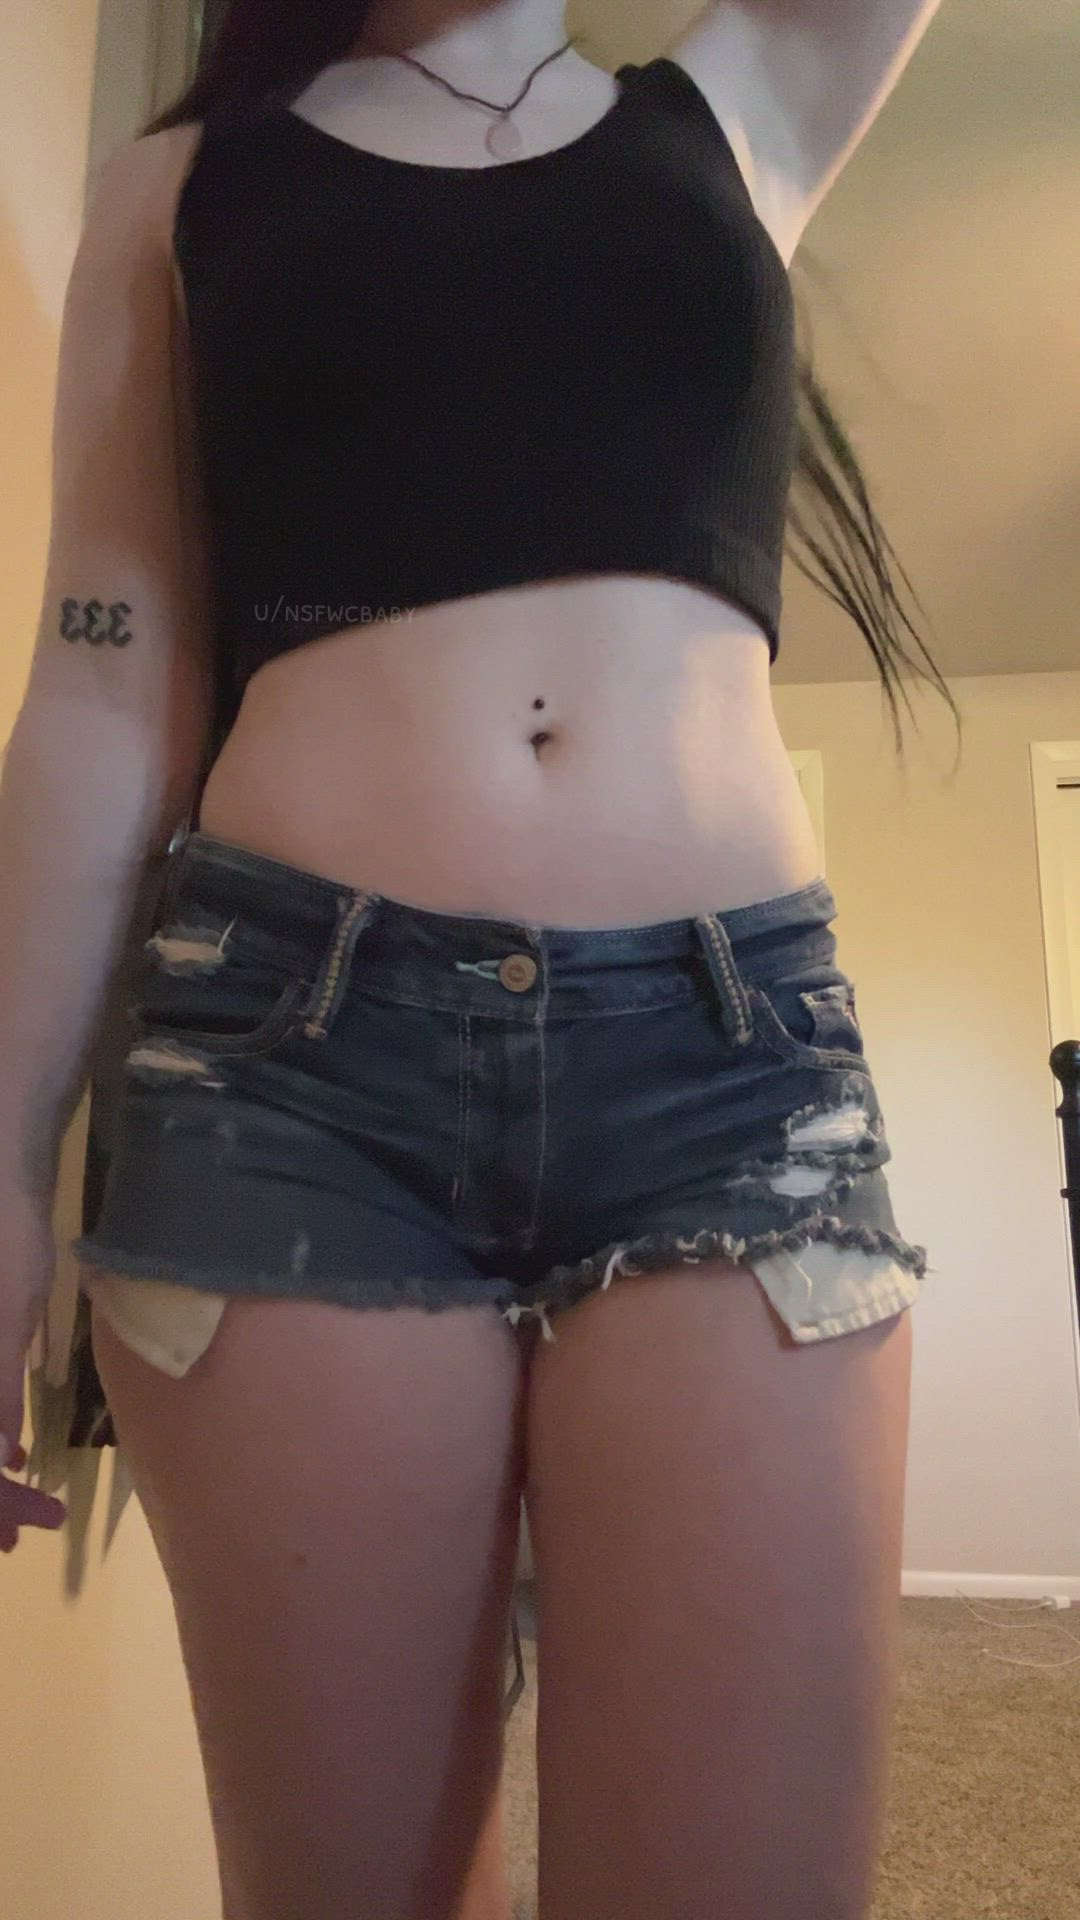 Ass porn video with onlyfans model Babyc33 <strong>@babyc33</strong>